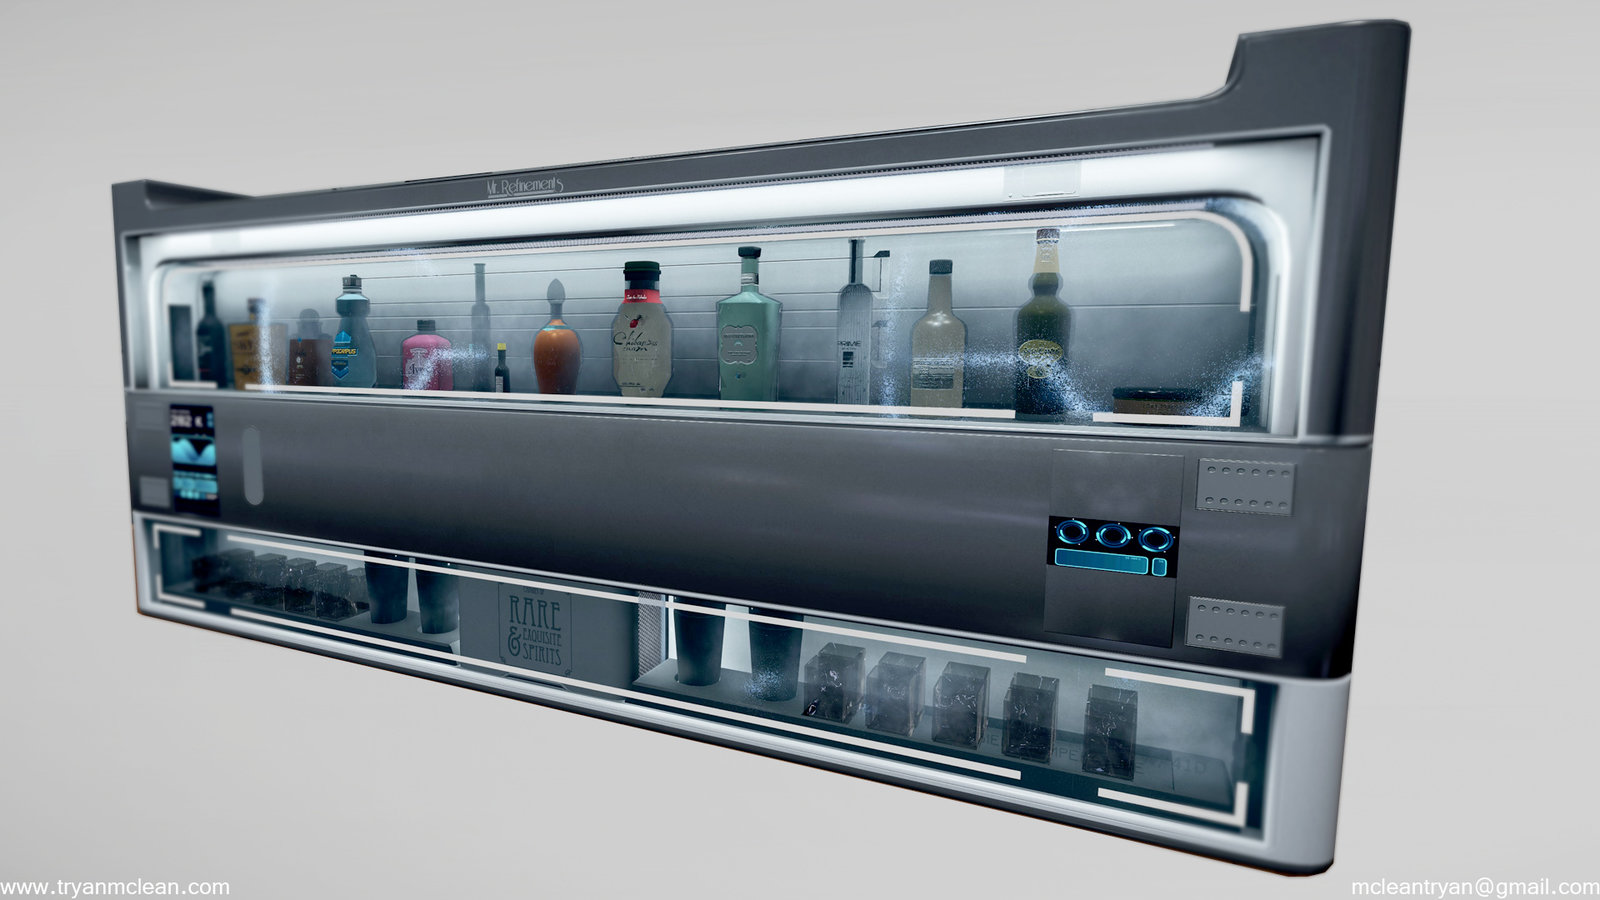 Star Citizen Subscriber Flair Liquor Cabinet. Modelling by myself. VFX and Liquor logos done by others on team. 